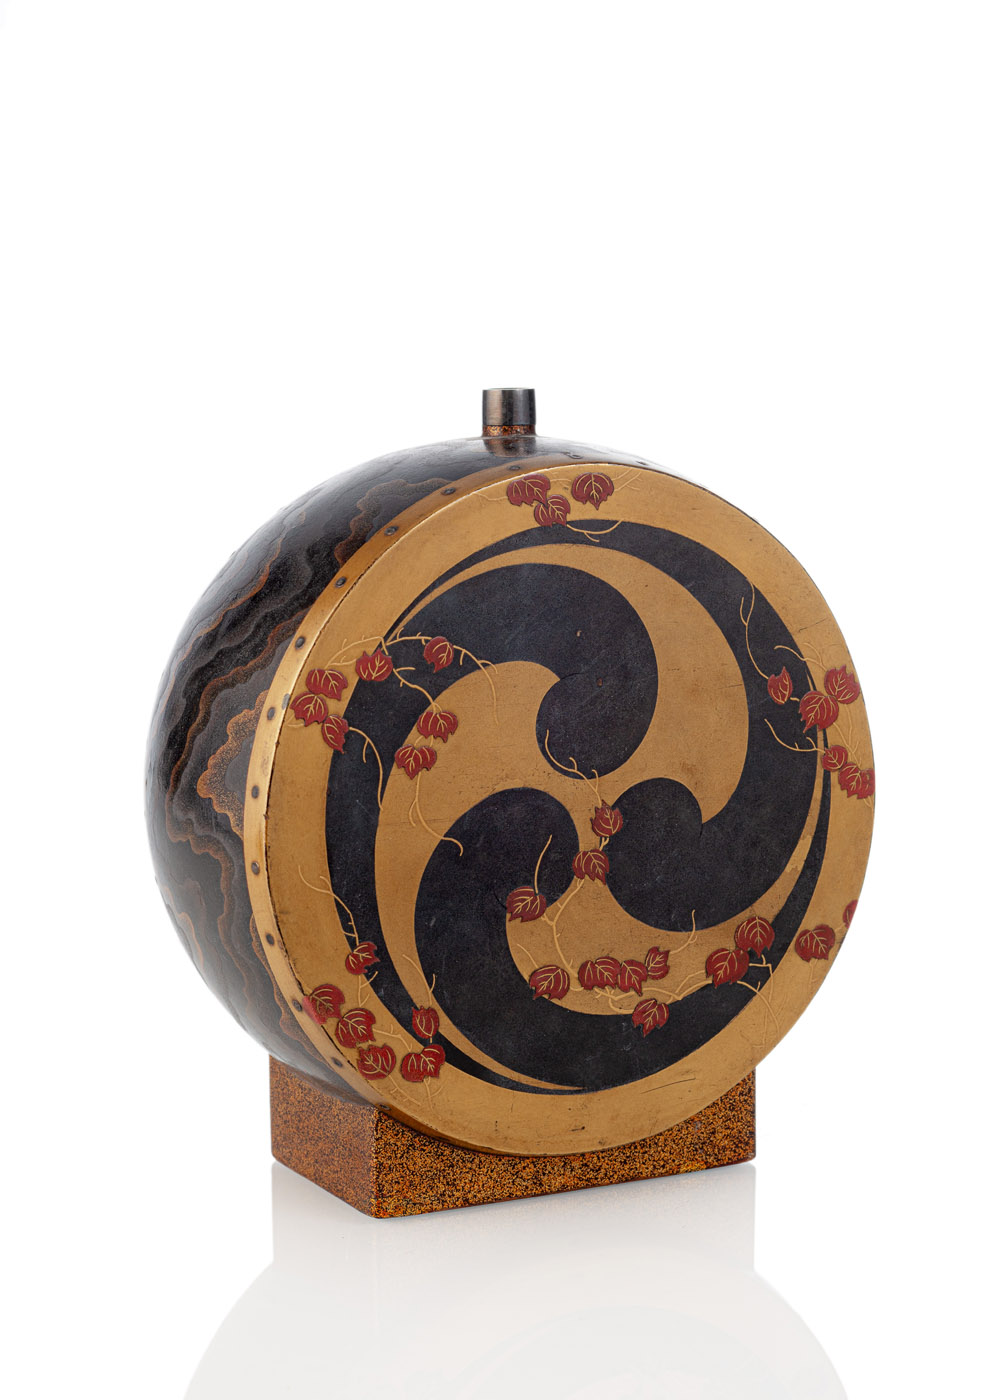 <b>A DRUM-SHAPED LACQUER SAKE BOTTLE WITH MAPLE LEAVES</b>